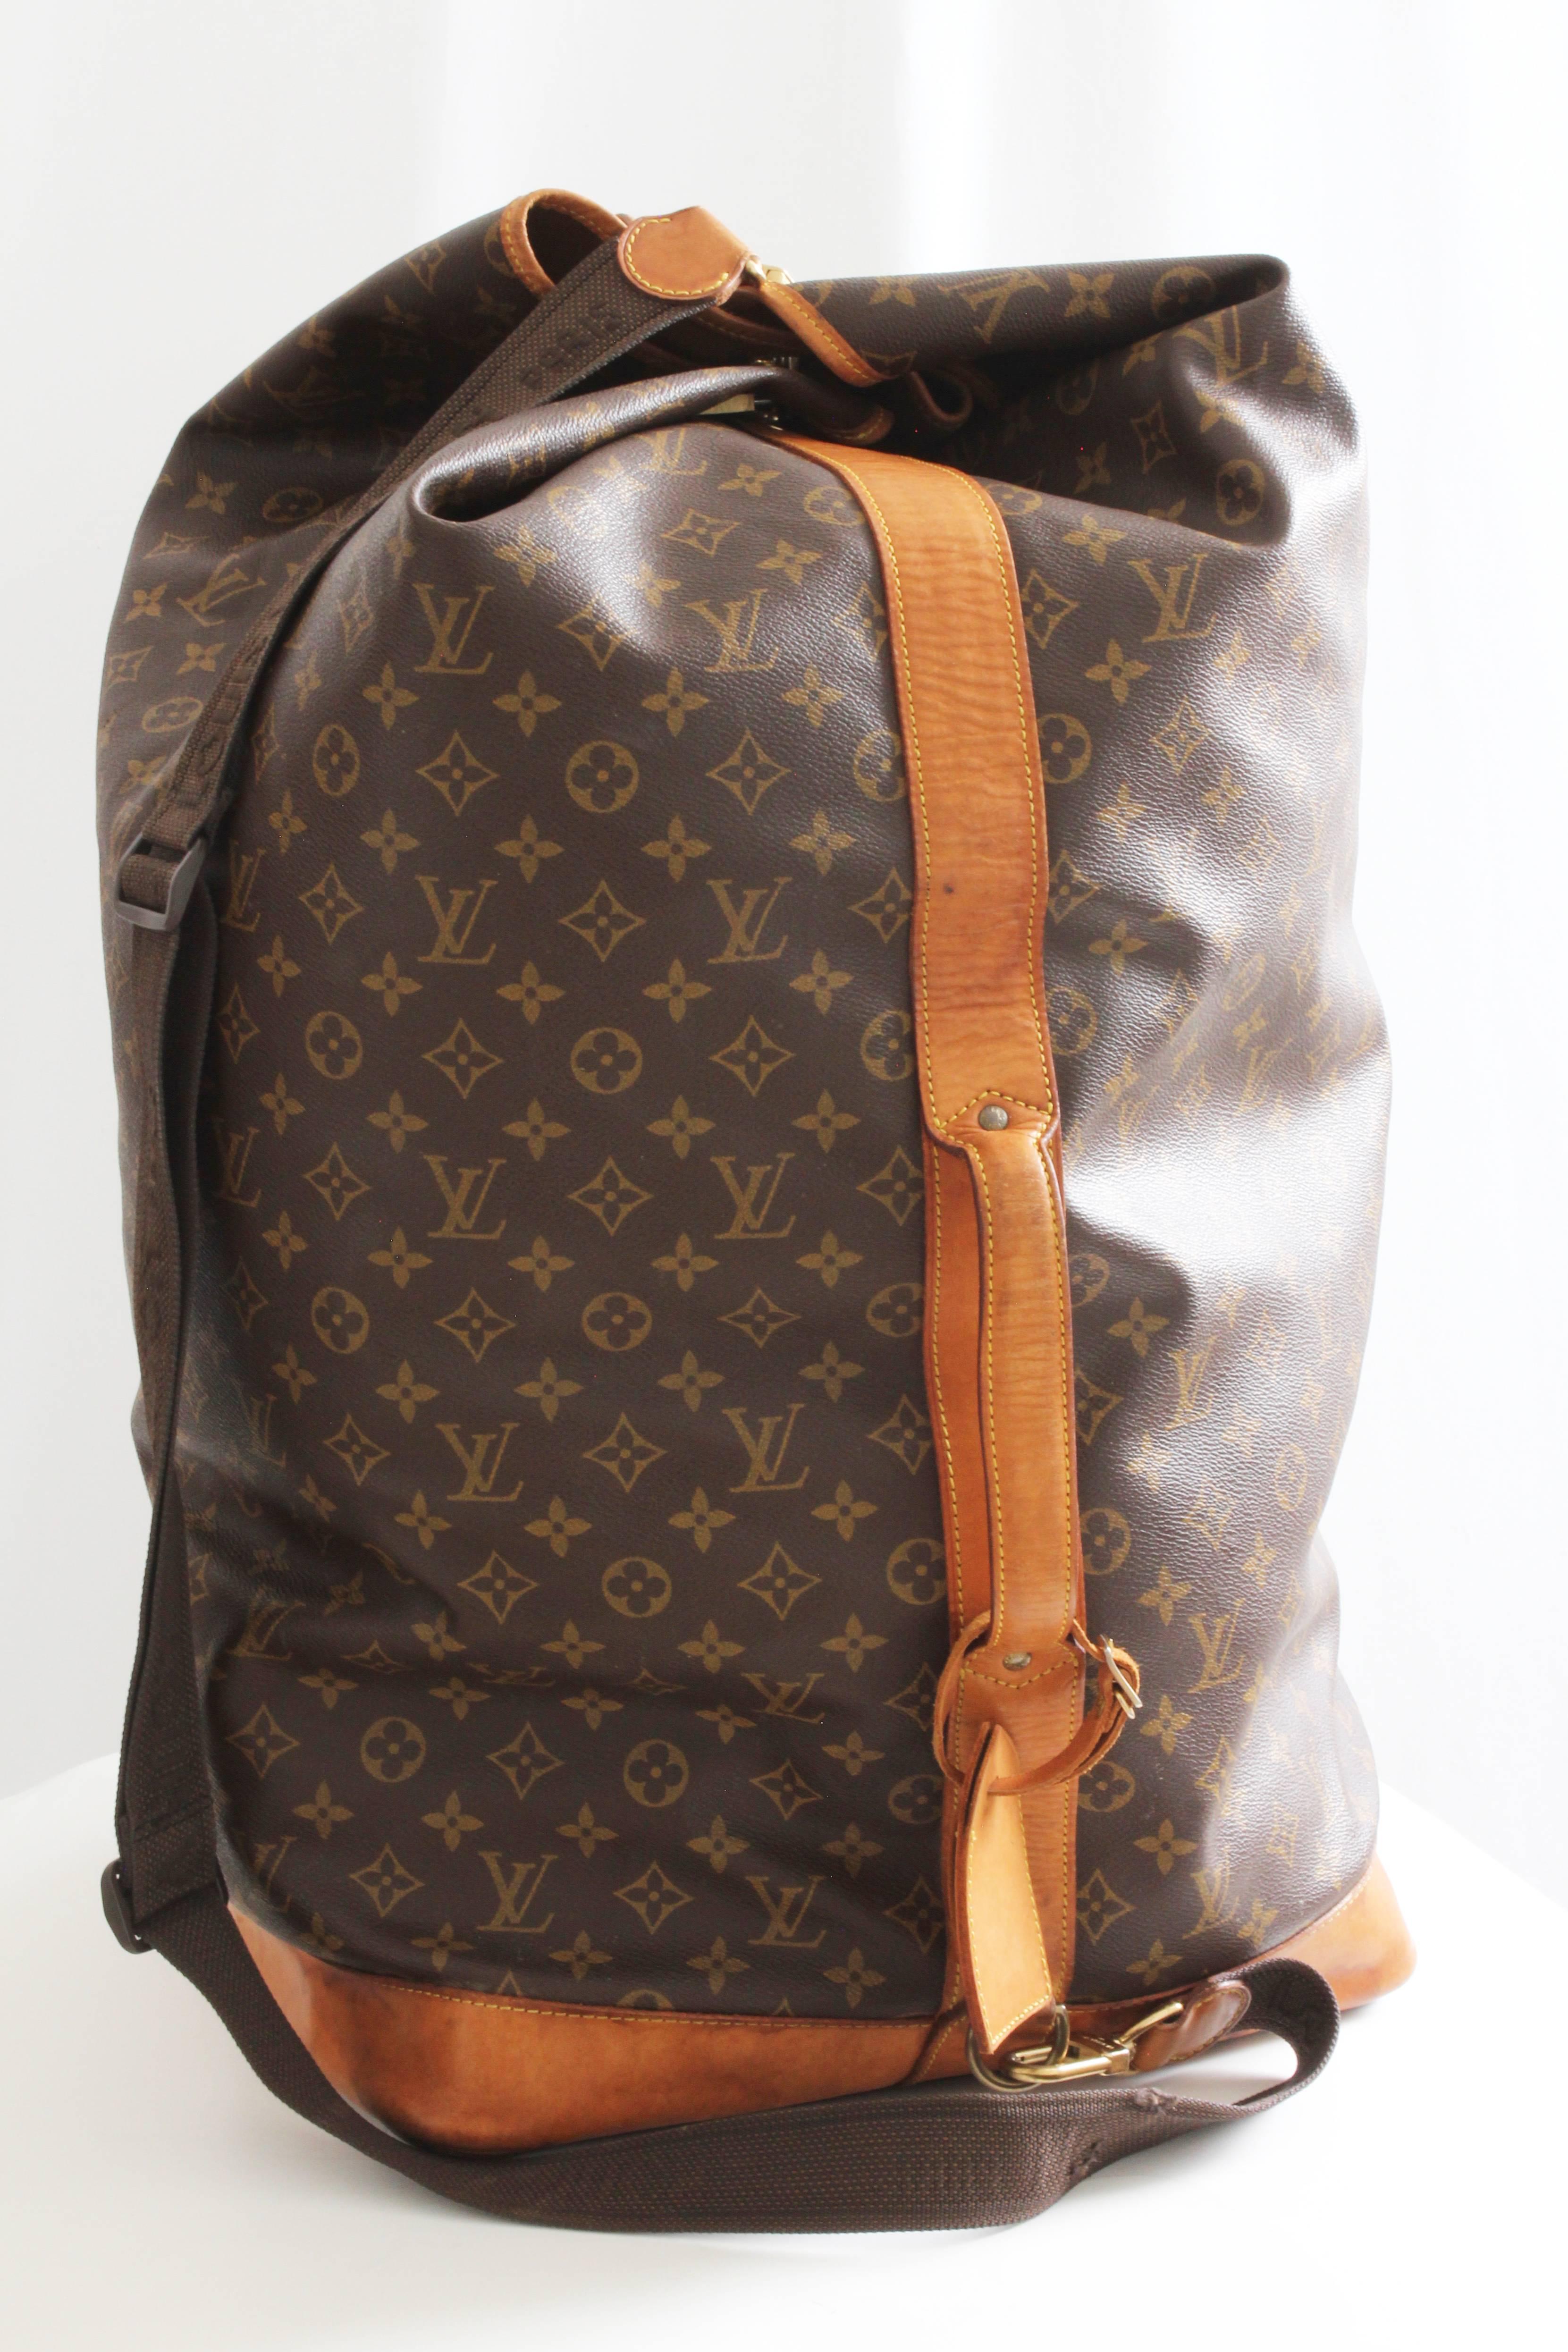 Travel in style with this incredible Louis Vuitton monogram Sac Marin GM. Made from LV's signature monogram canvas with vachetta leather trim, this extra-large travel bag holds a ton!   Note that this GM size Sac Marin is no longer available for